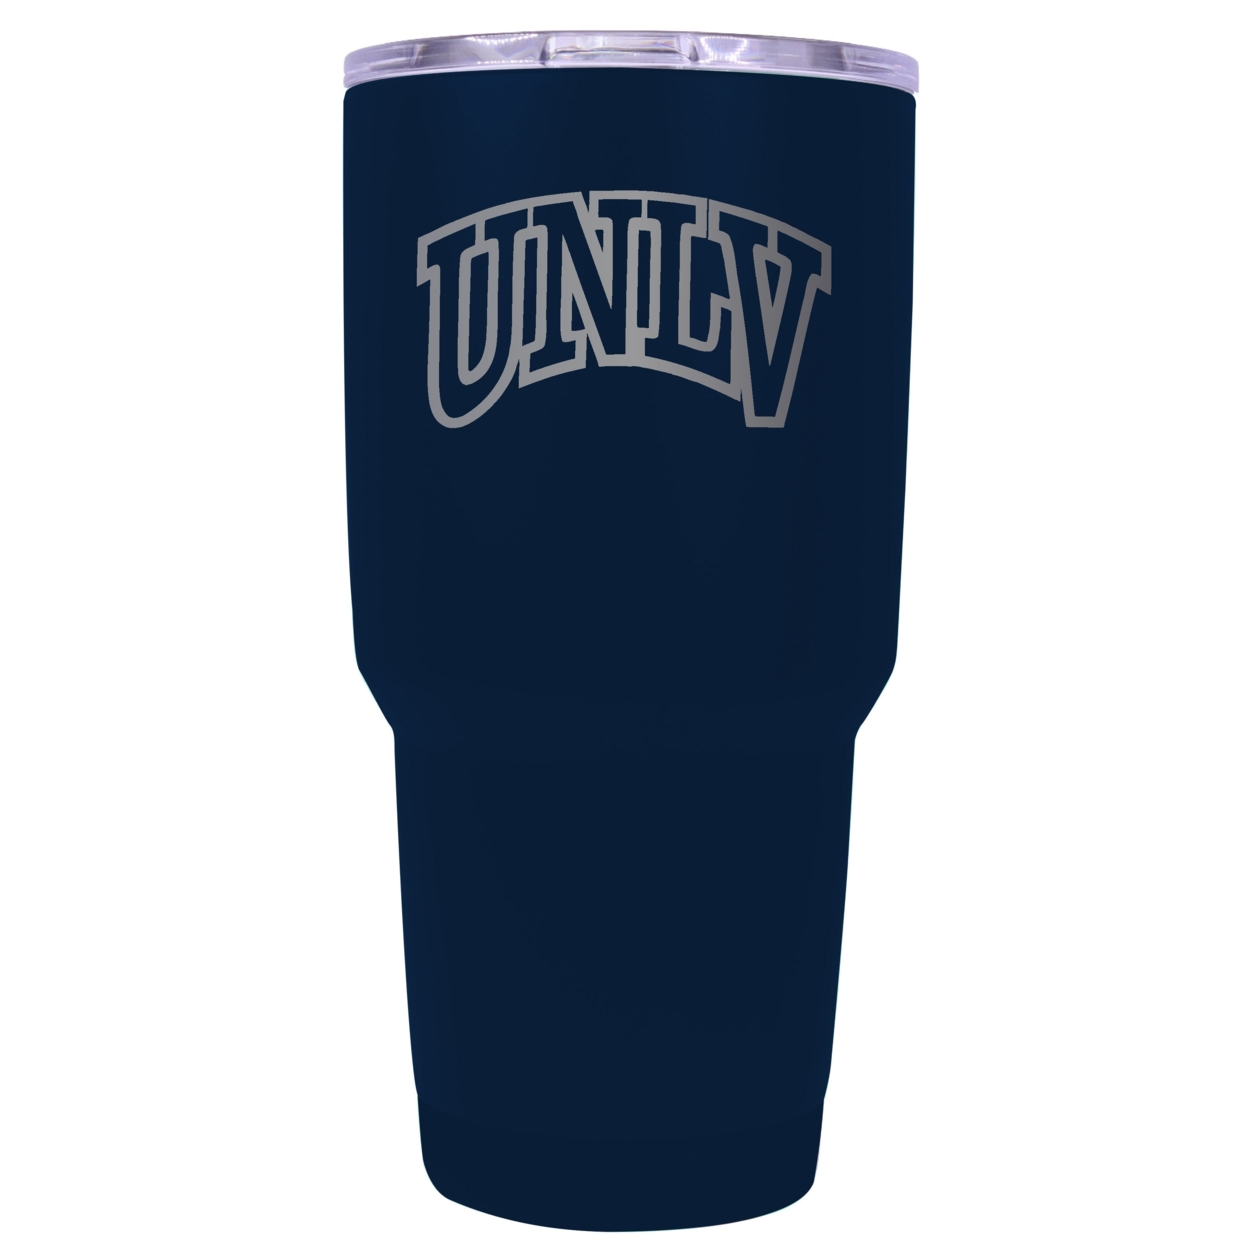 UNLV Rebels 24 Oz Laser Engraved Stainless Steel Insulated Tumbler - Choose Your Color. - Coral